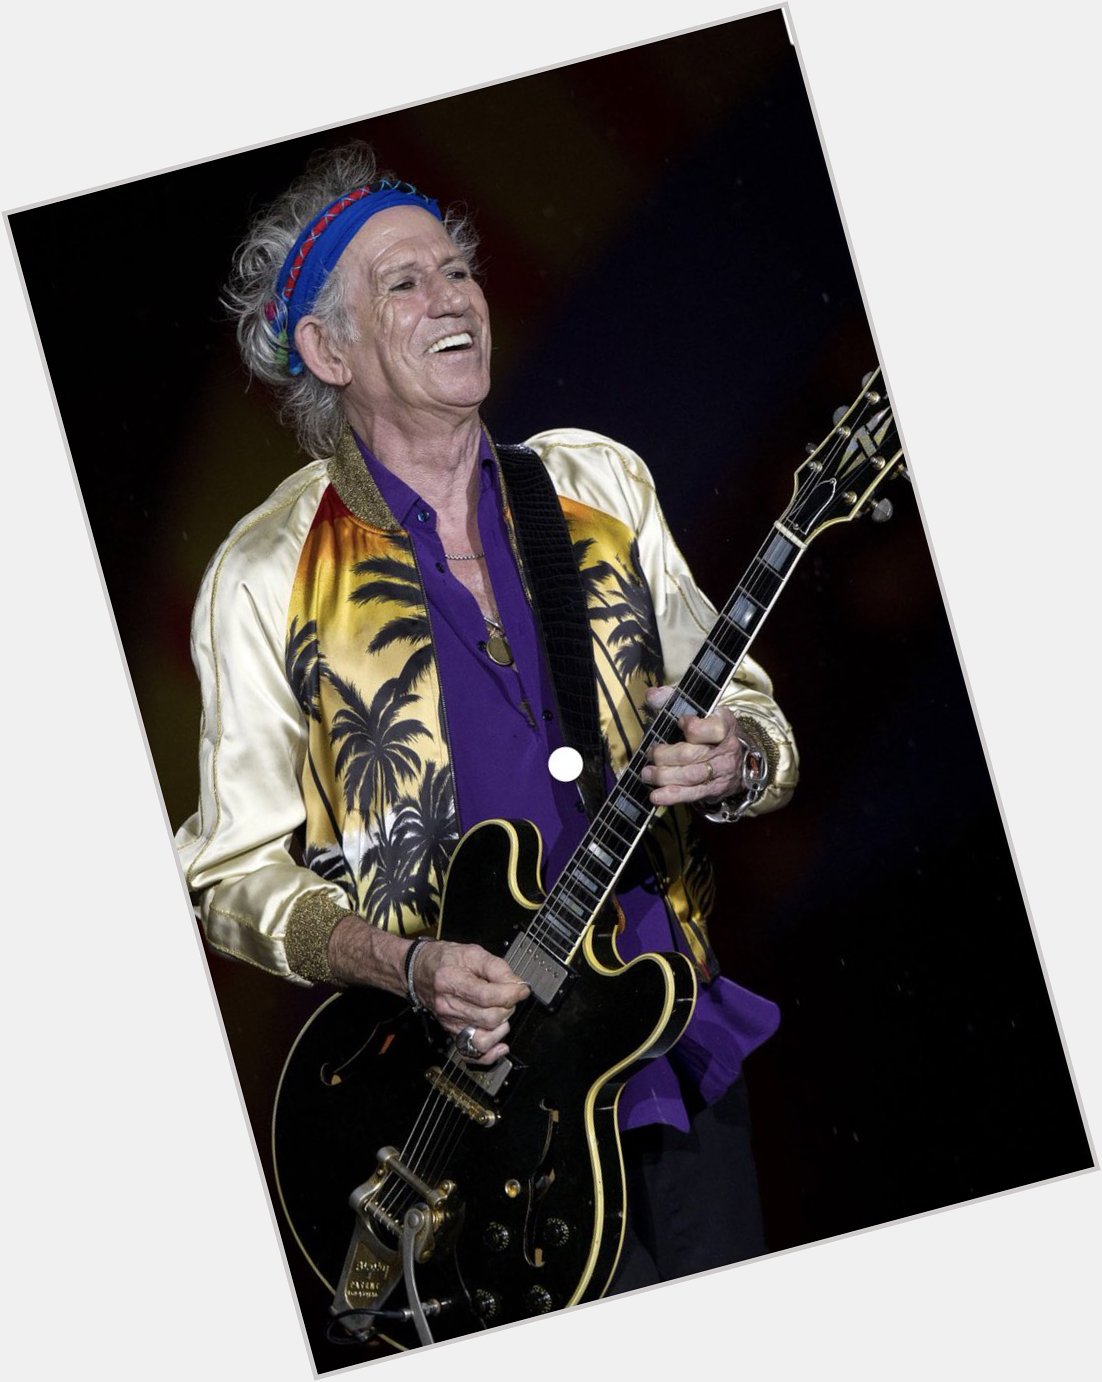 Happy 77th birthday Keith Richards.
Somehow you ve always looked 77.
And you will probably outlive everyone. 